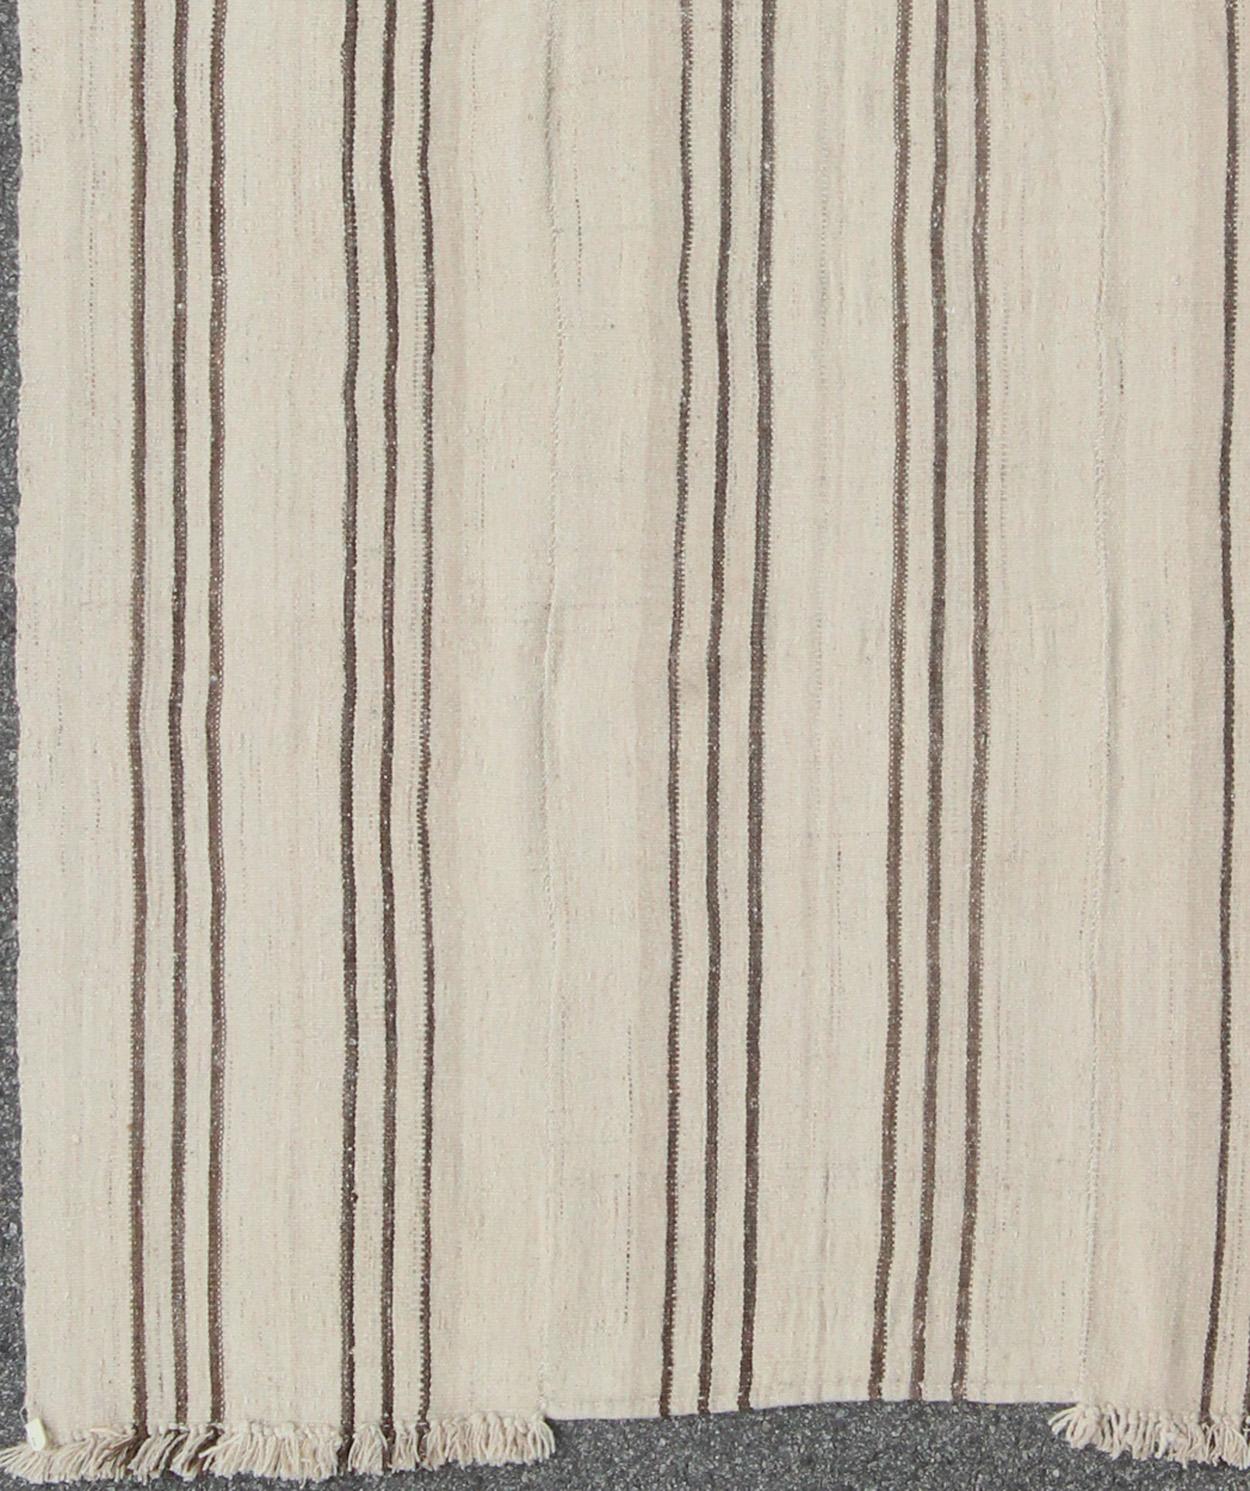 Hand-Woven Striped Turkish Vintage Kilim Flat-Weave Rug in Shades of Browns and Ivory For Sale